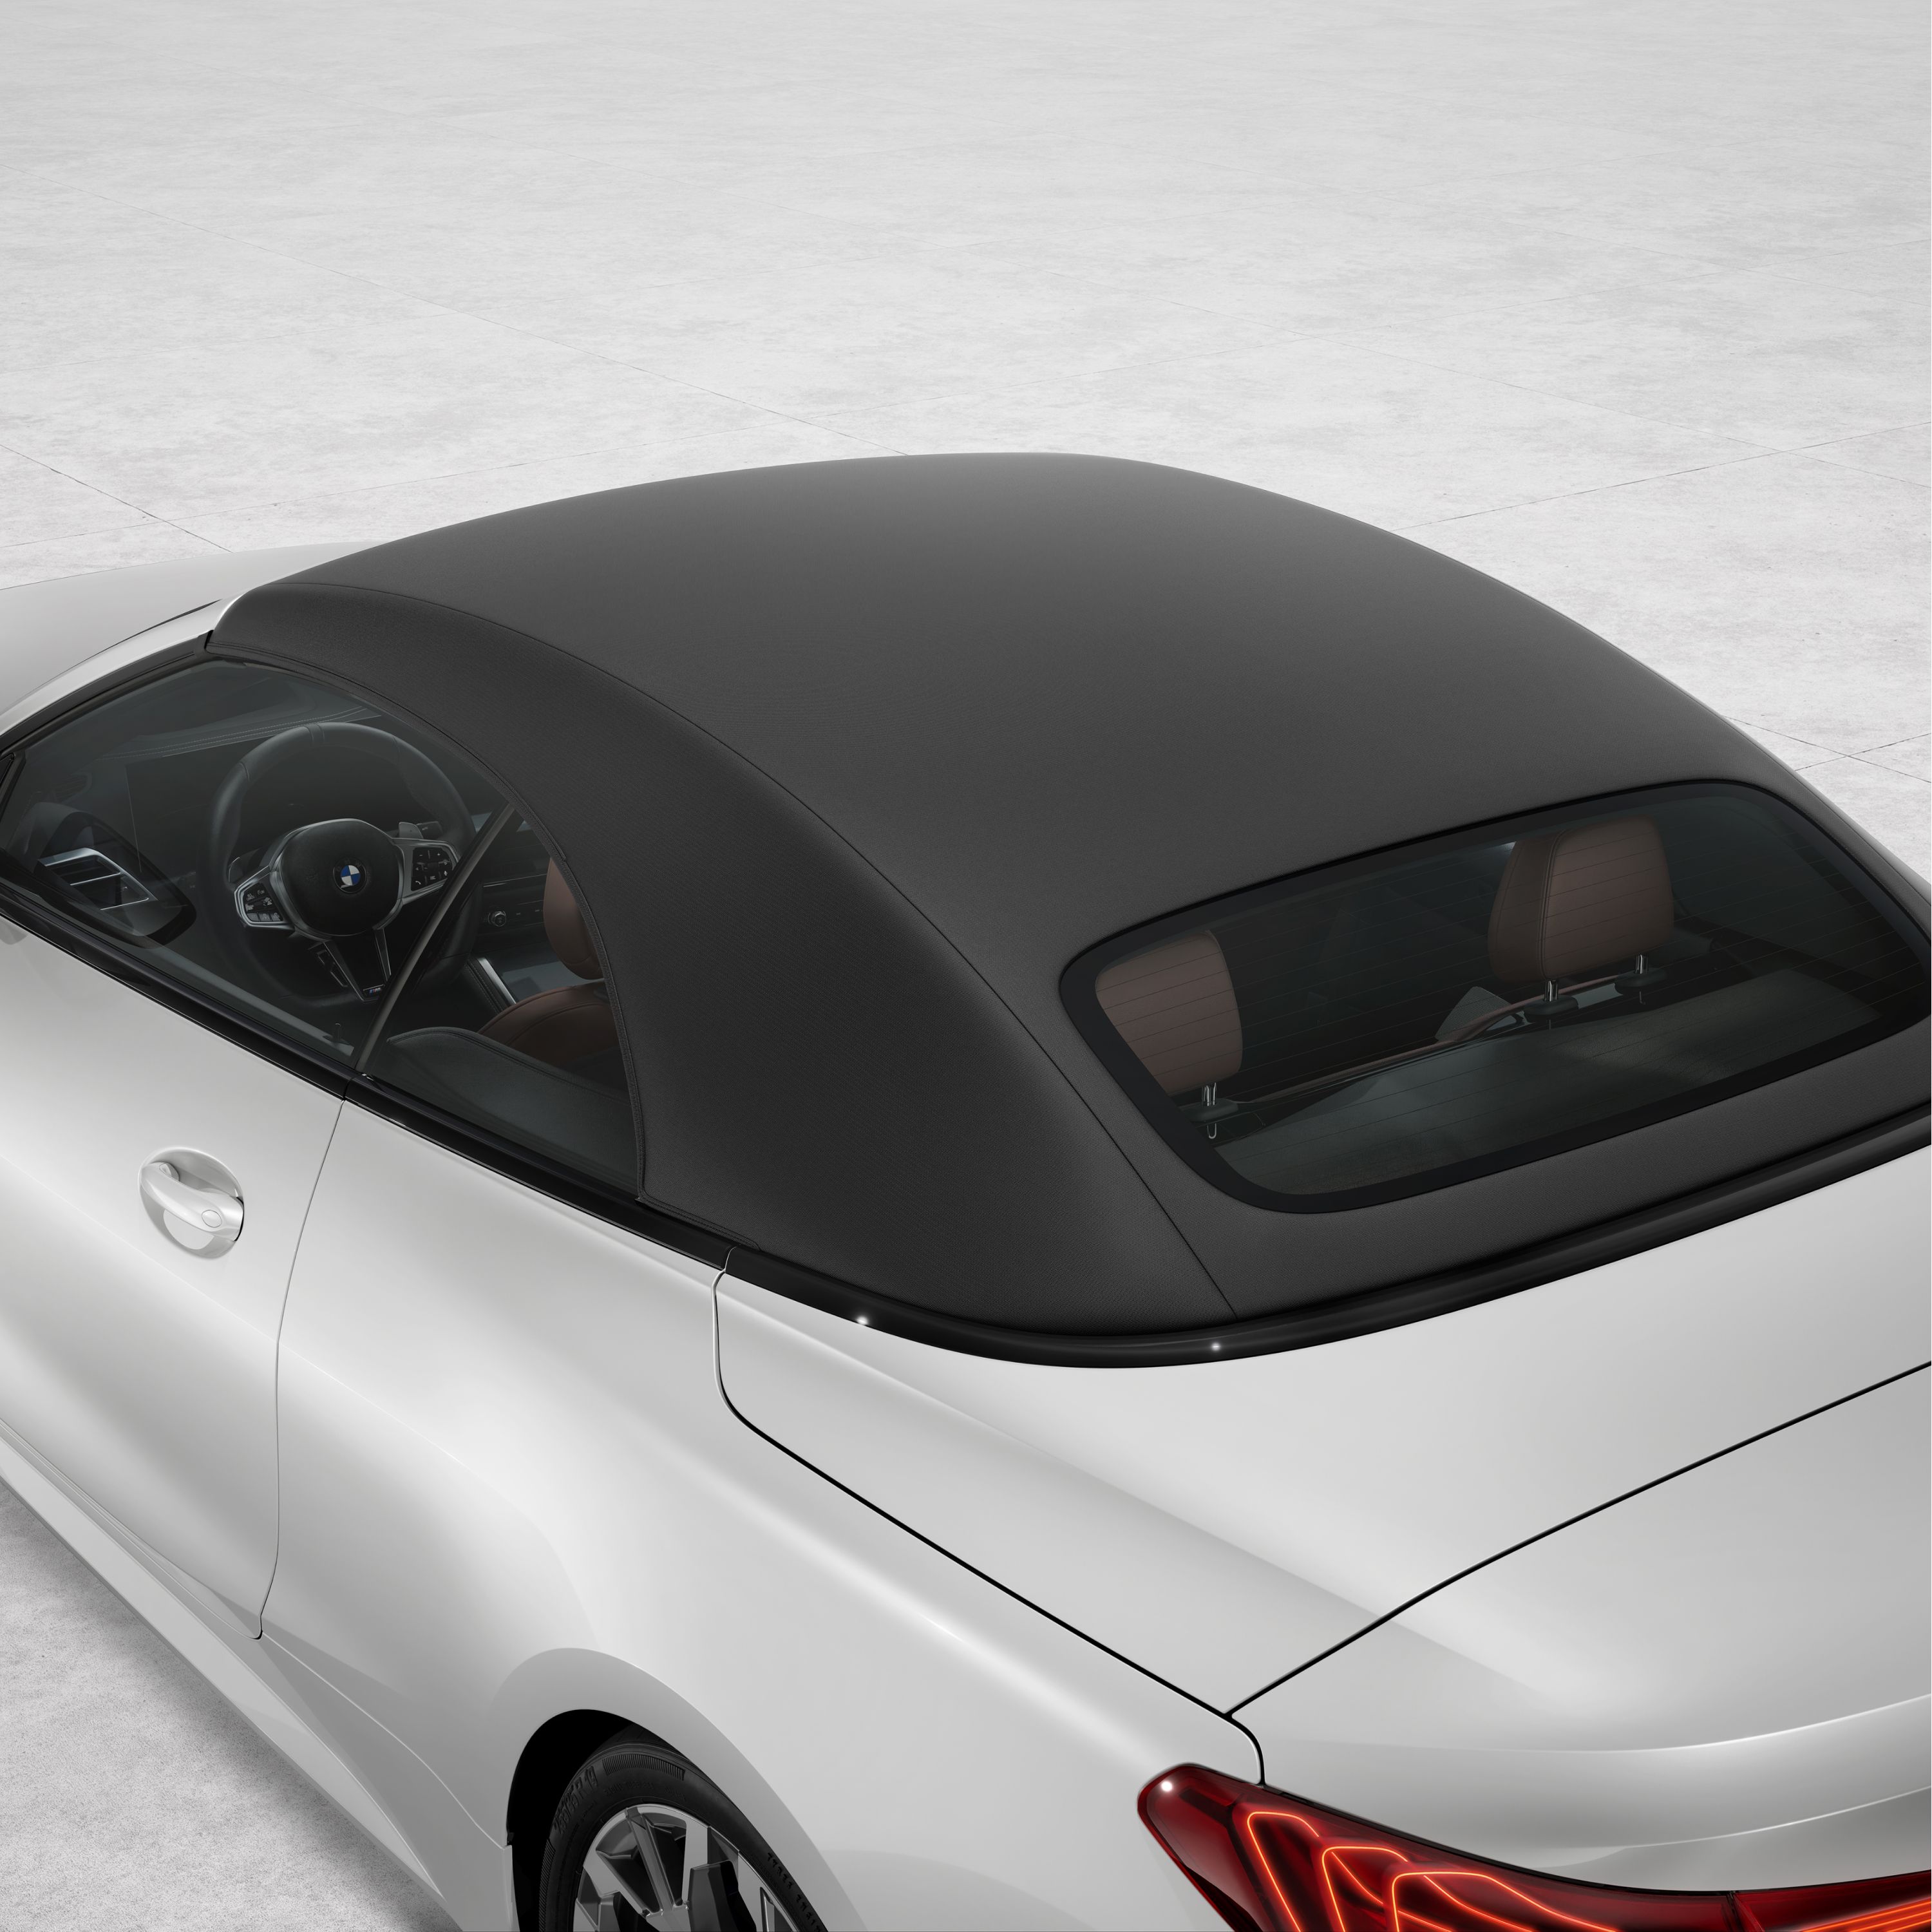 The tailored soft top on the BMW 4 Series Convertible